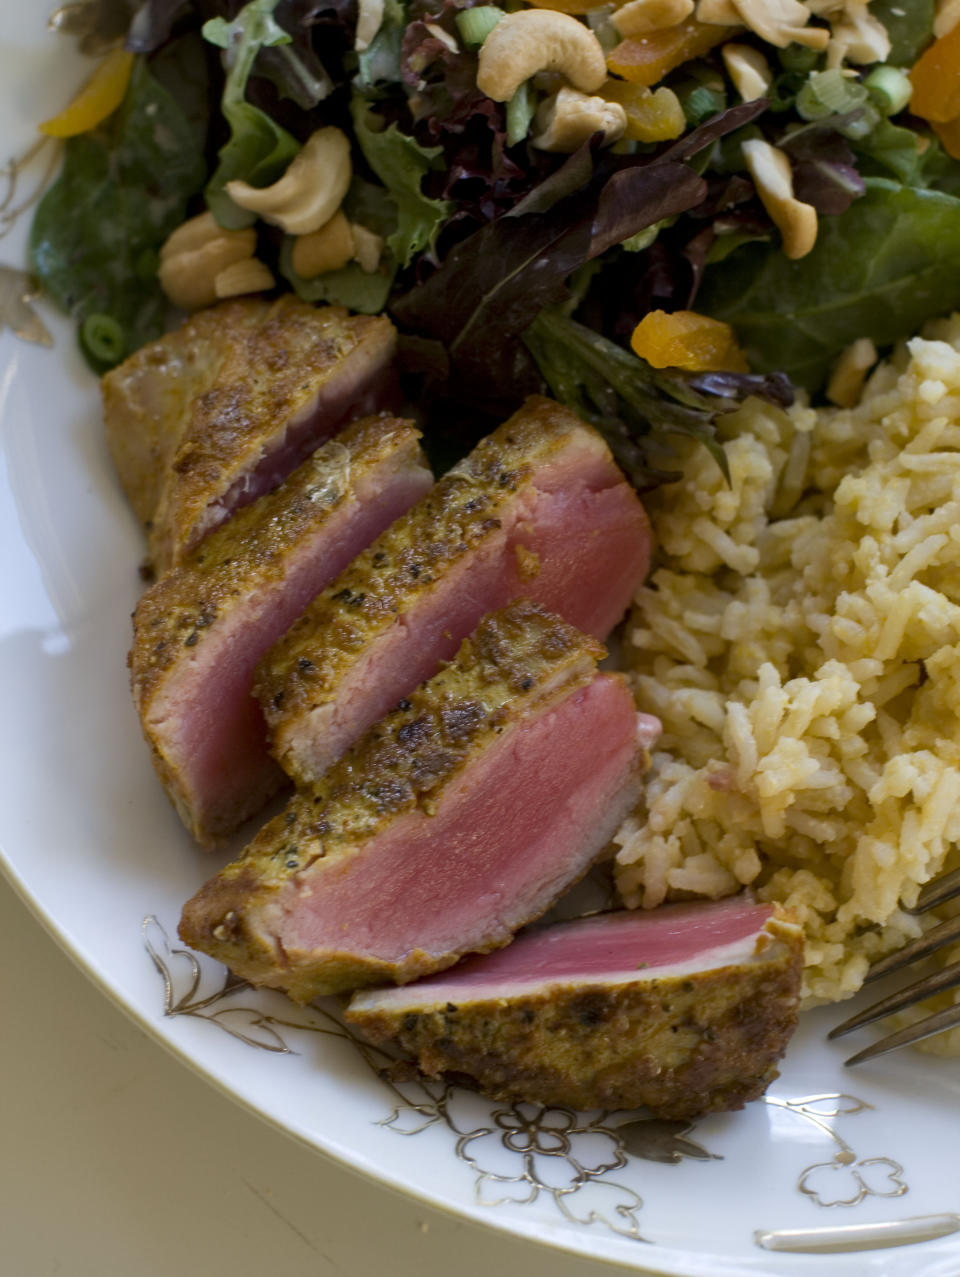 This Nov. 18, 2013 photo shows coconut cashew salad with apricots and seared curry rubbed tuna with mango tahini rice in Concord, N.H. It's a mash-up that draws on the flavors of the Caribbean, Southeast Asia and Europe. (AP Photo/Matthew Mead)